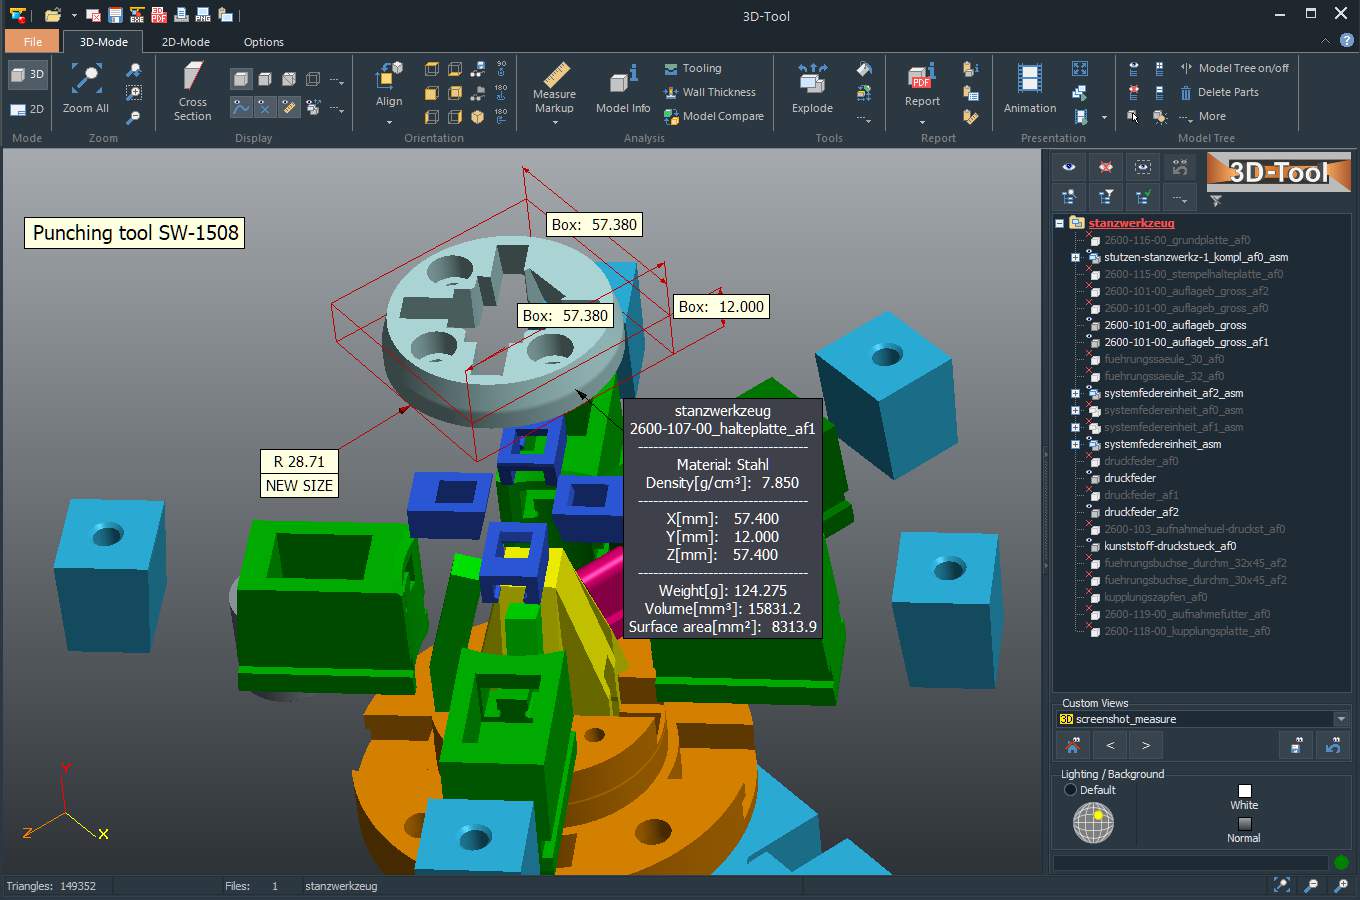 Extensive functions and tools in the 3D-Tool CAD Viewer 